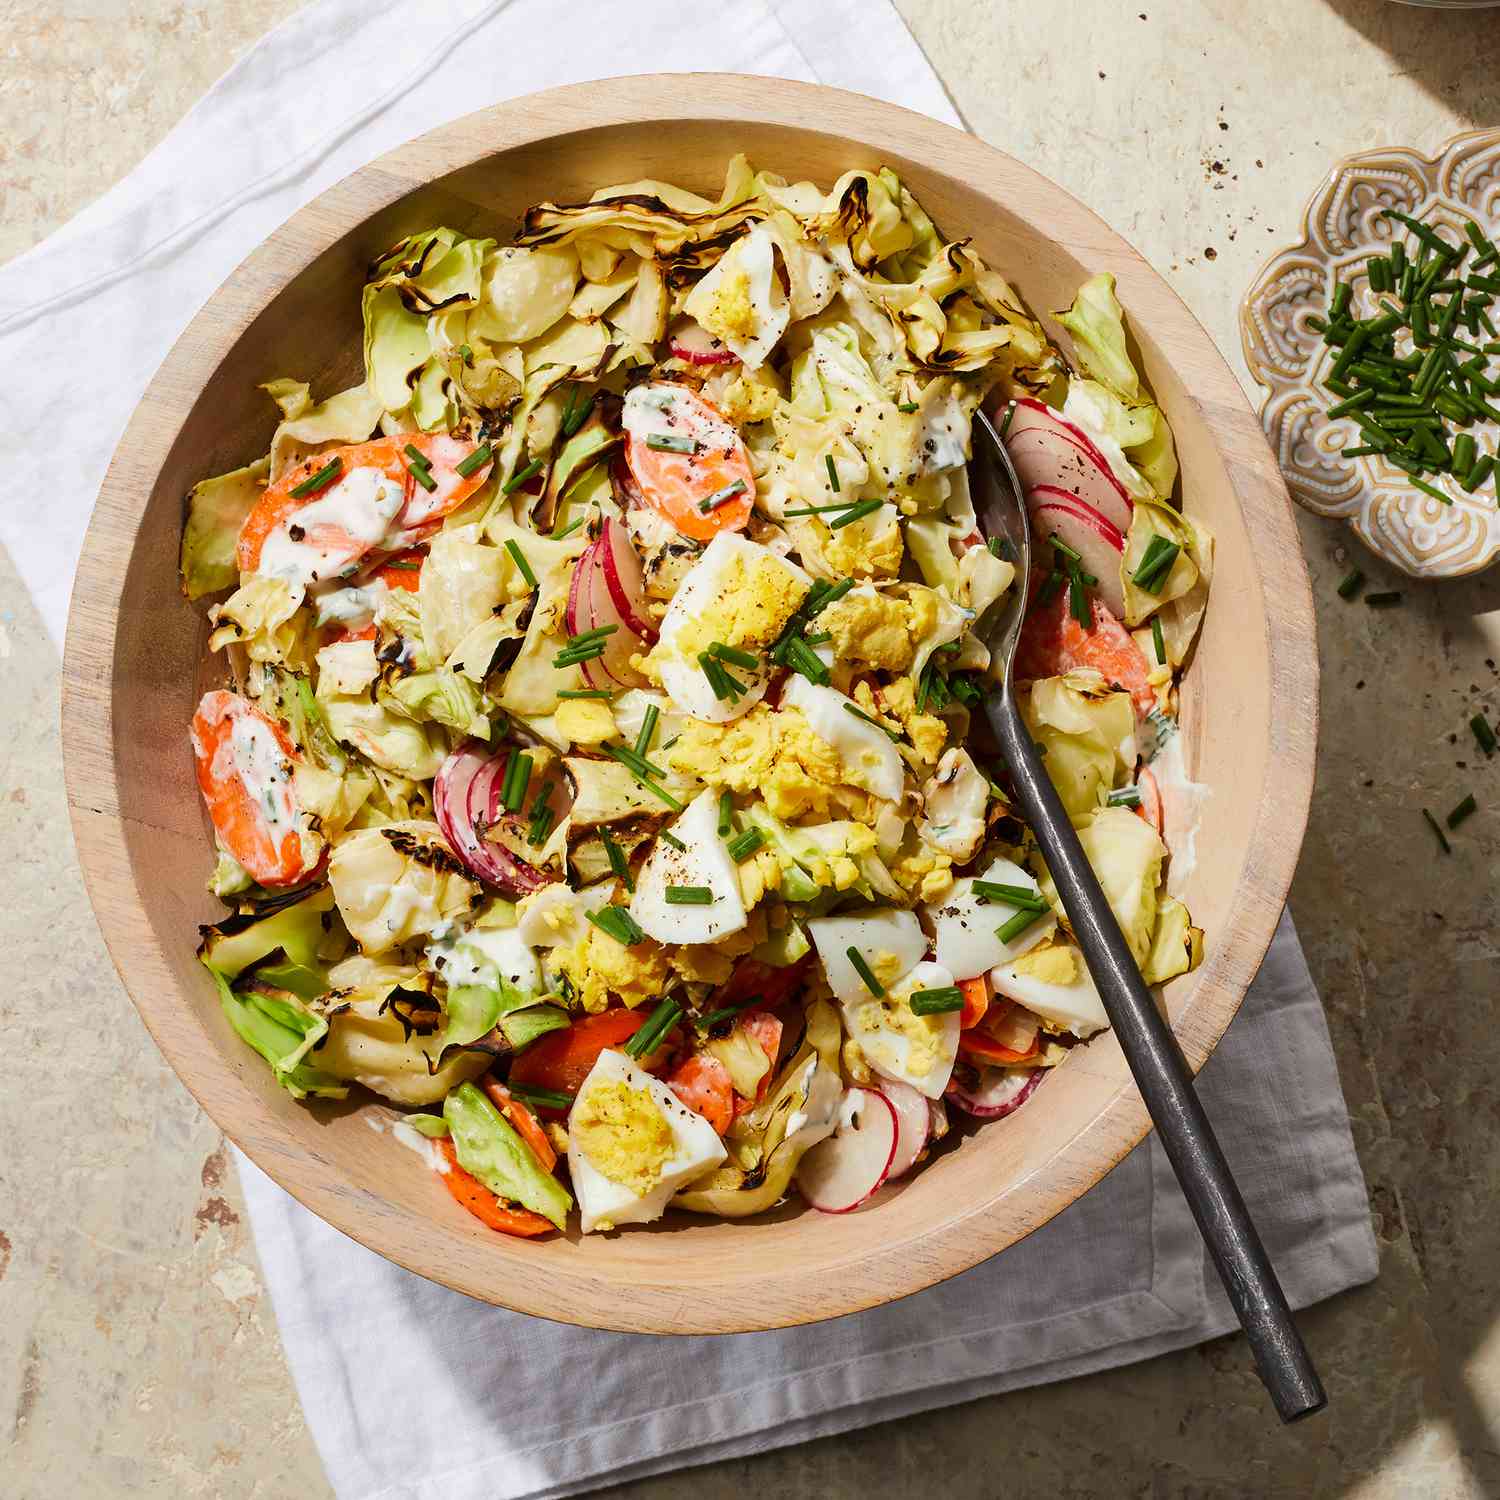 Grilled Cabbage Chopped Salad with Herbed Buttermilk Dressing